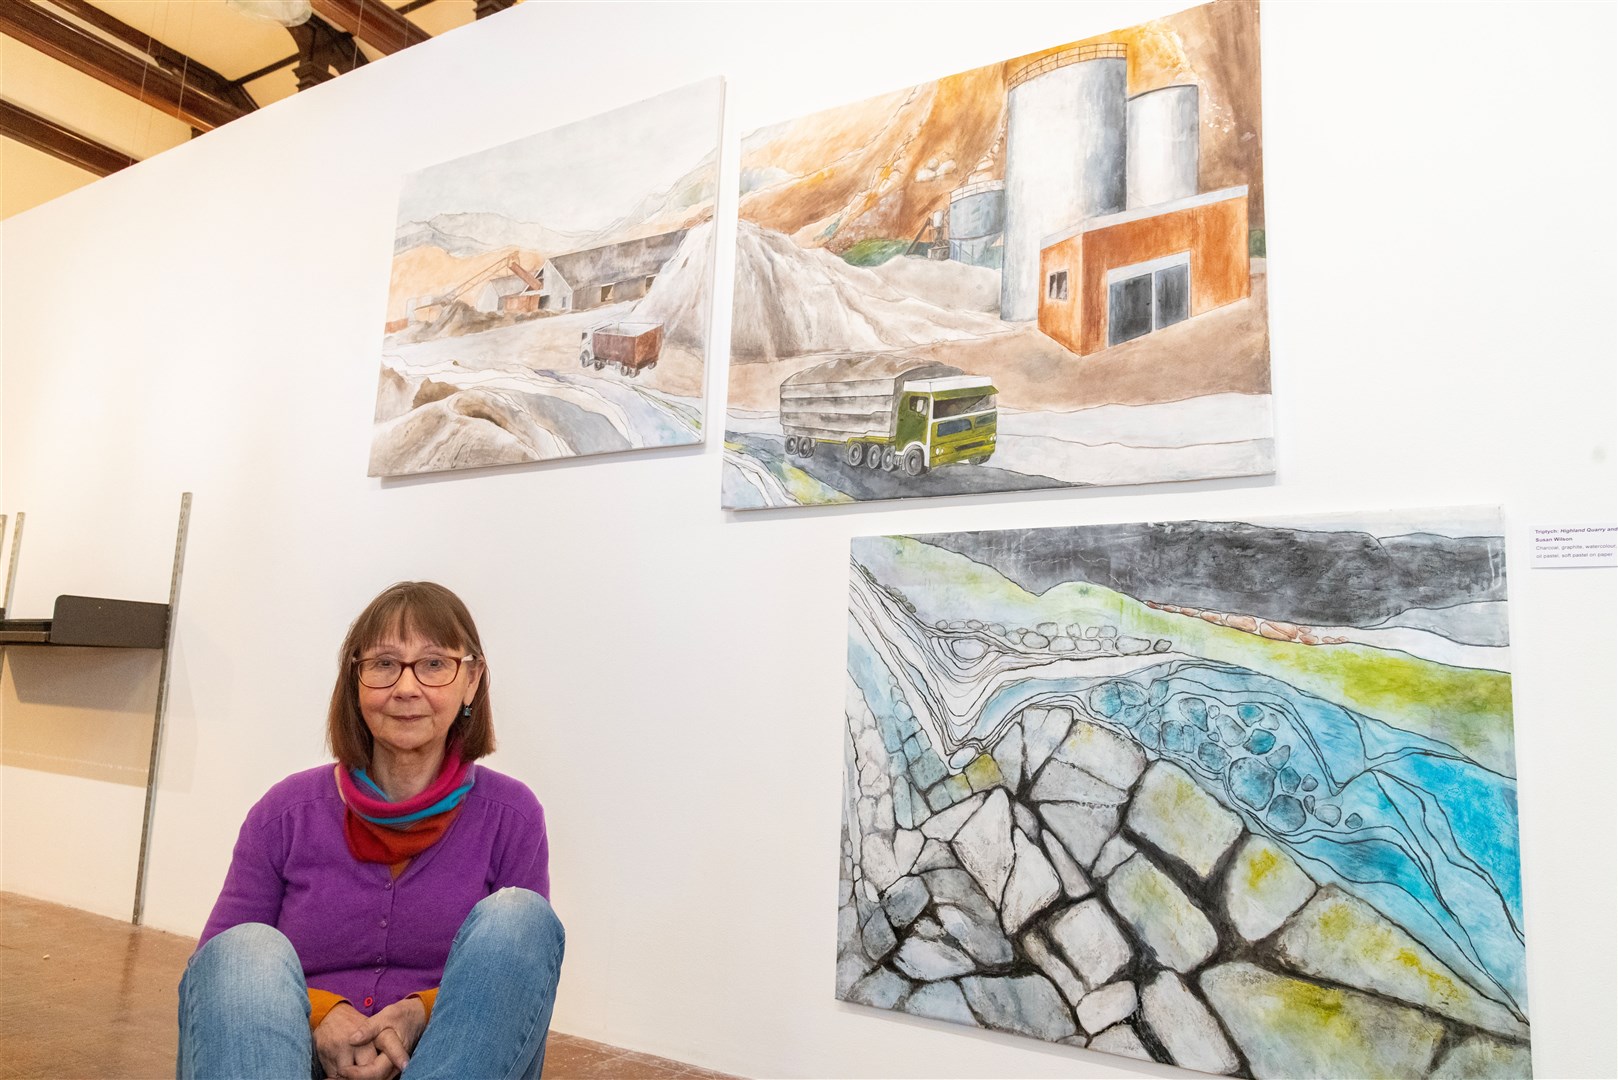 Susan Wilson has combined her interest in art and geology for her project, which focuses on the geological history of the planet. Picture: Beth Taylor